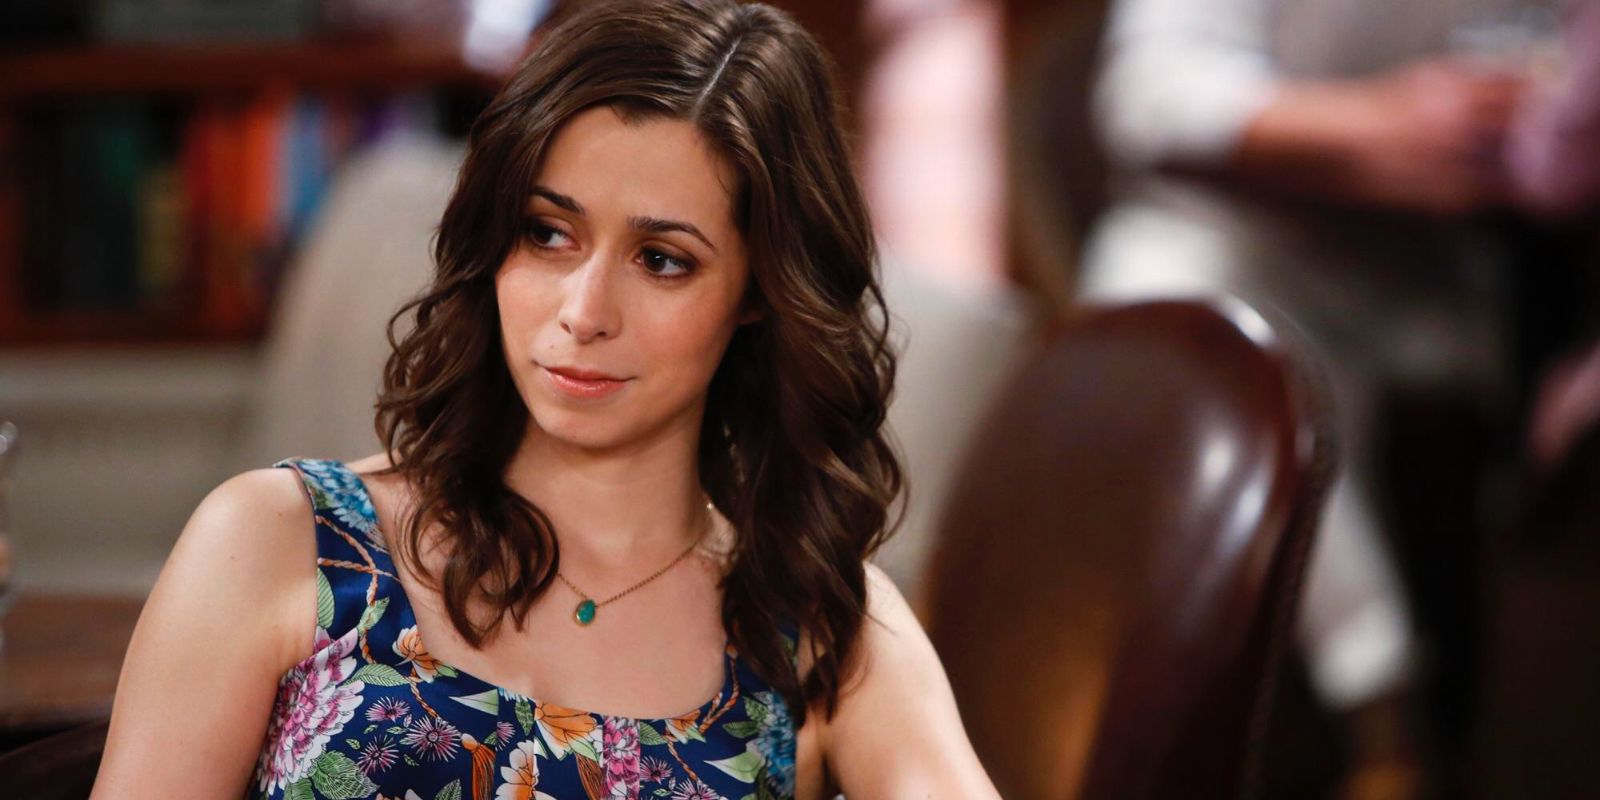 Which How I Met Your Mother Character Are You Based On Your Zodiac